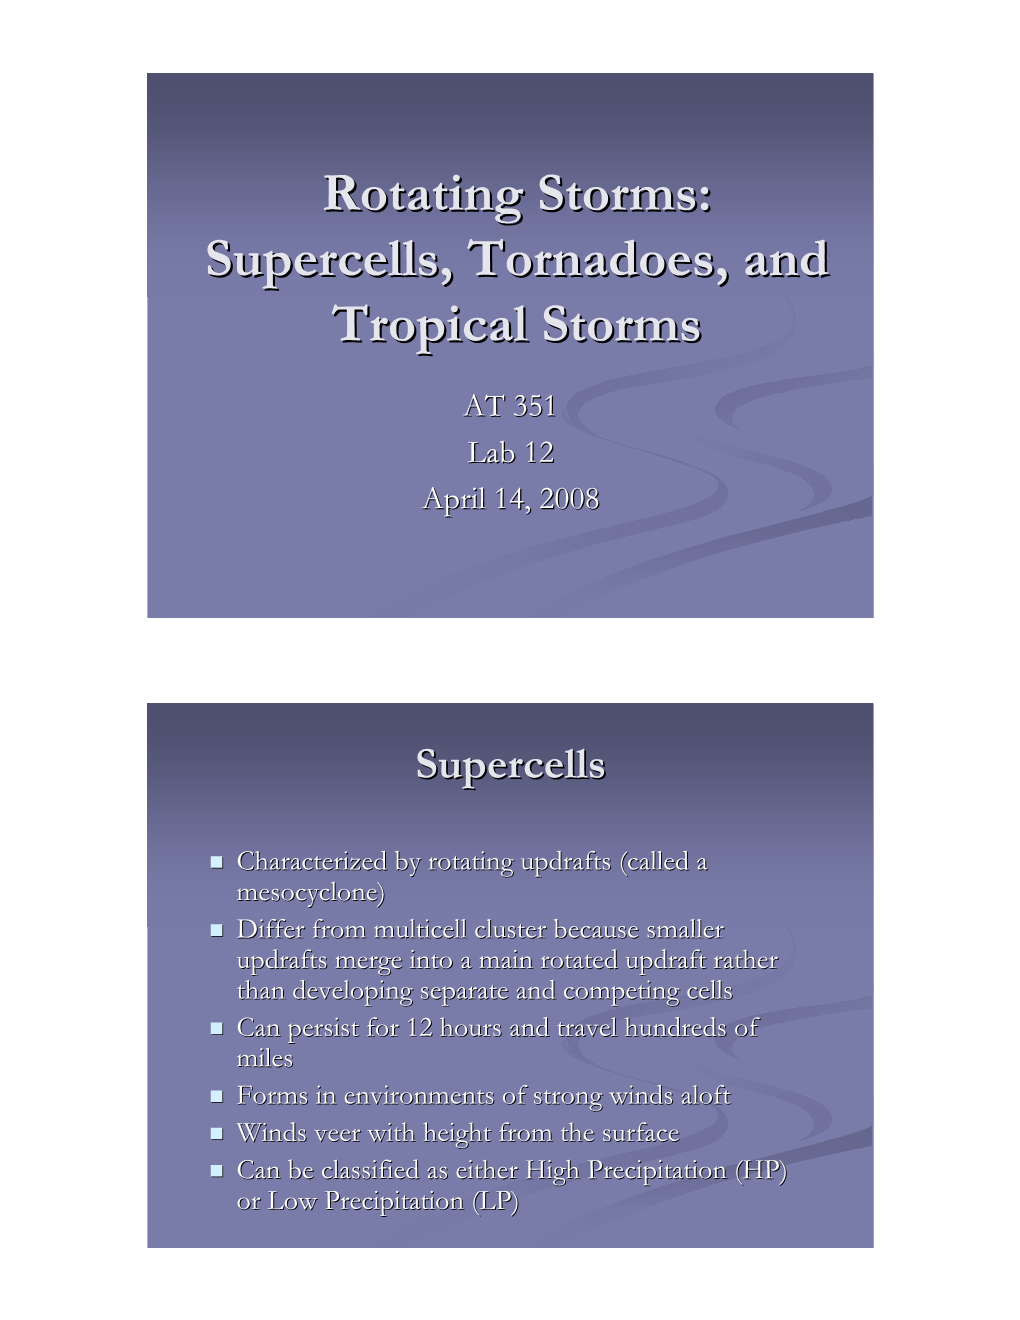 Rotating Storms: Supercells, Tornadoes, and Tropical Storms